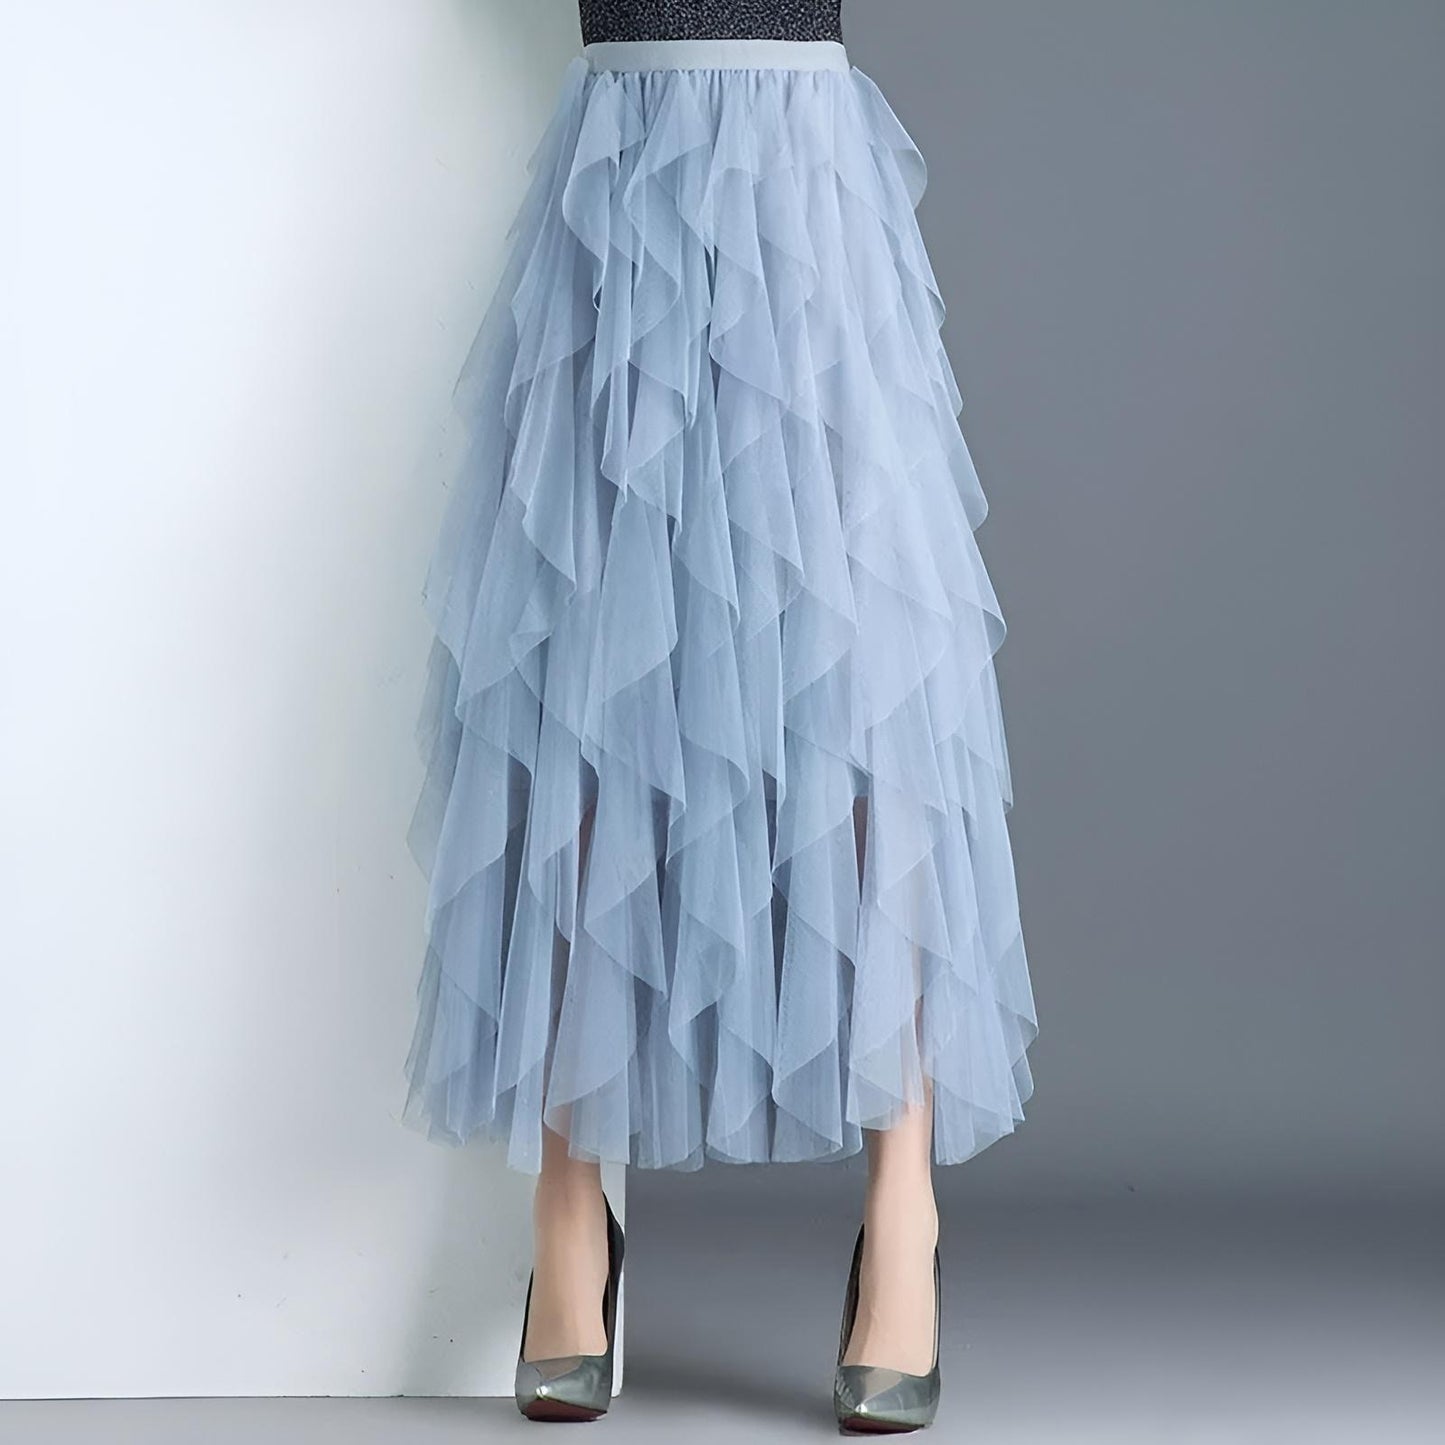 Gonna Lunga In Tulle Casual Blu Donna